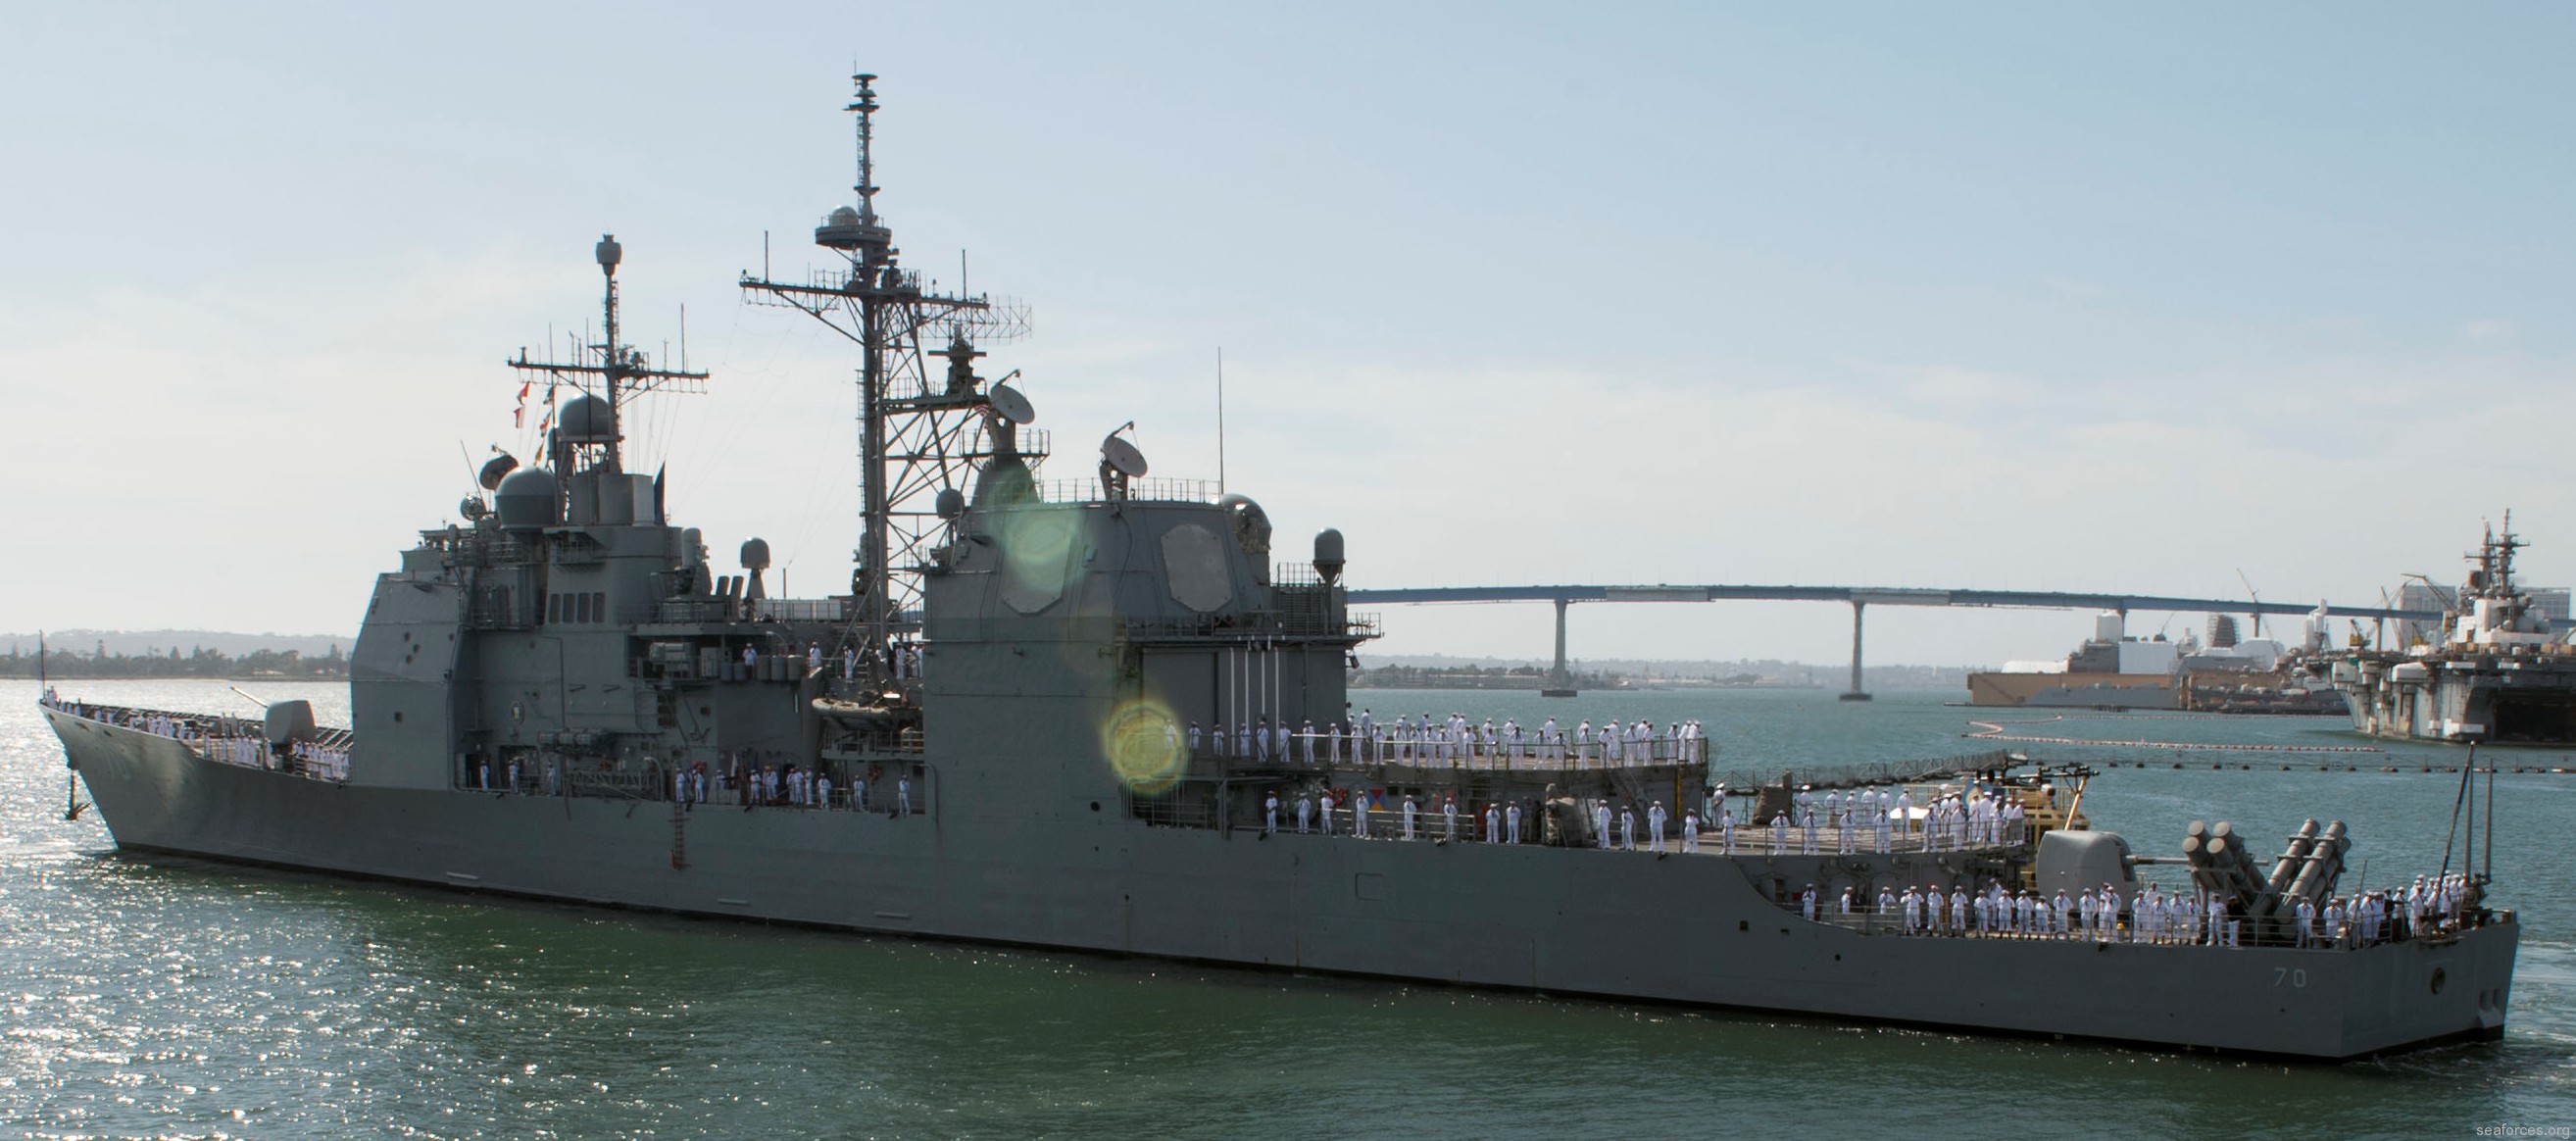 cg-70 uss lake erie ticonderoga class guided missile cruiser navy 04 departing san diego